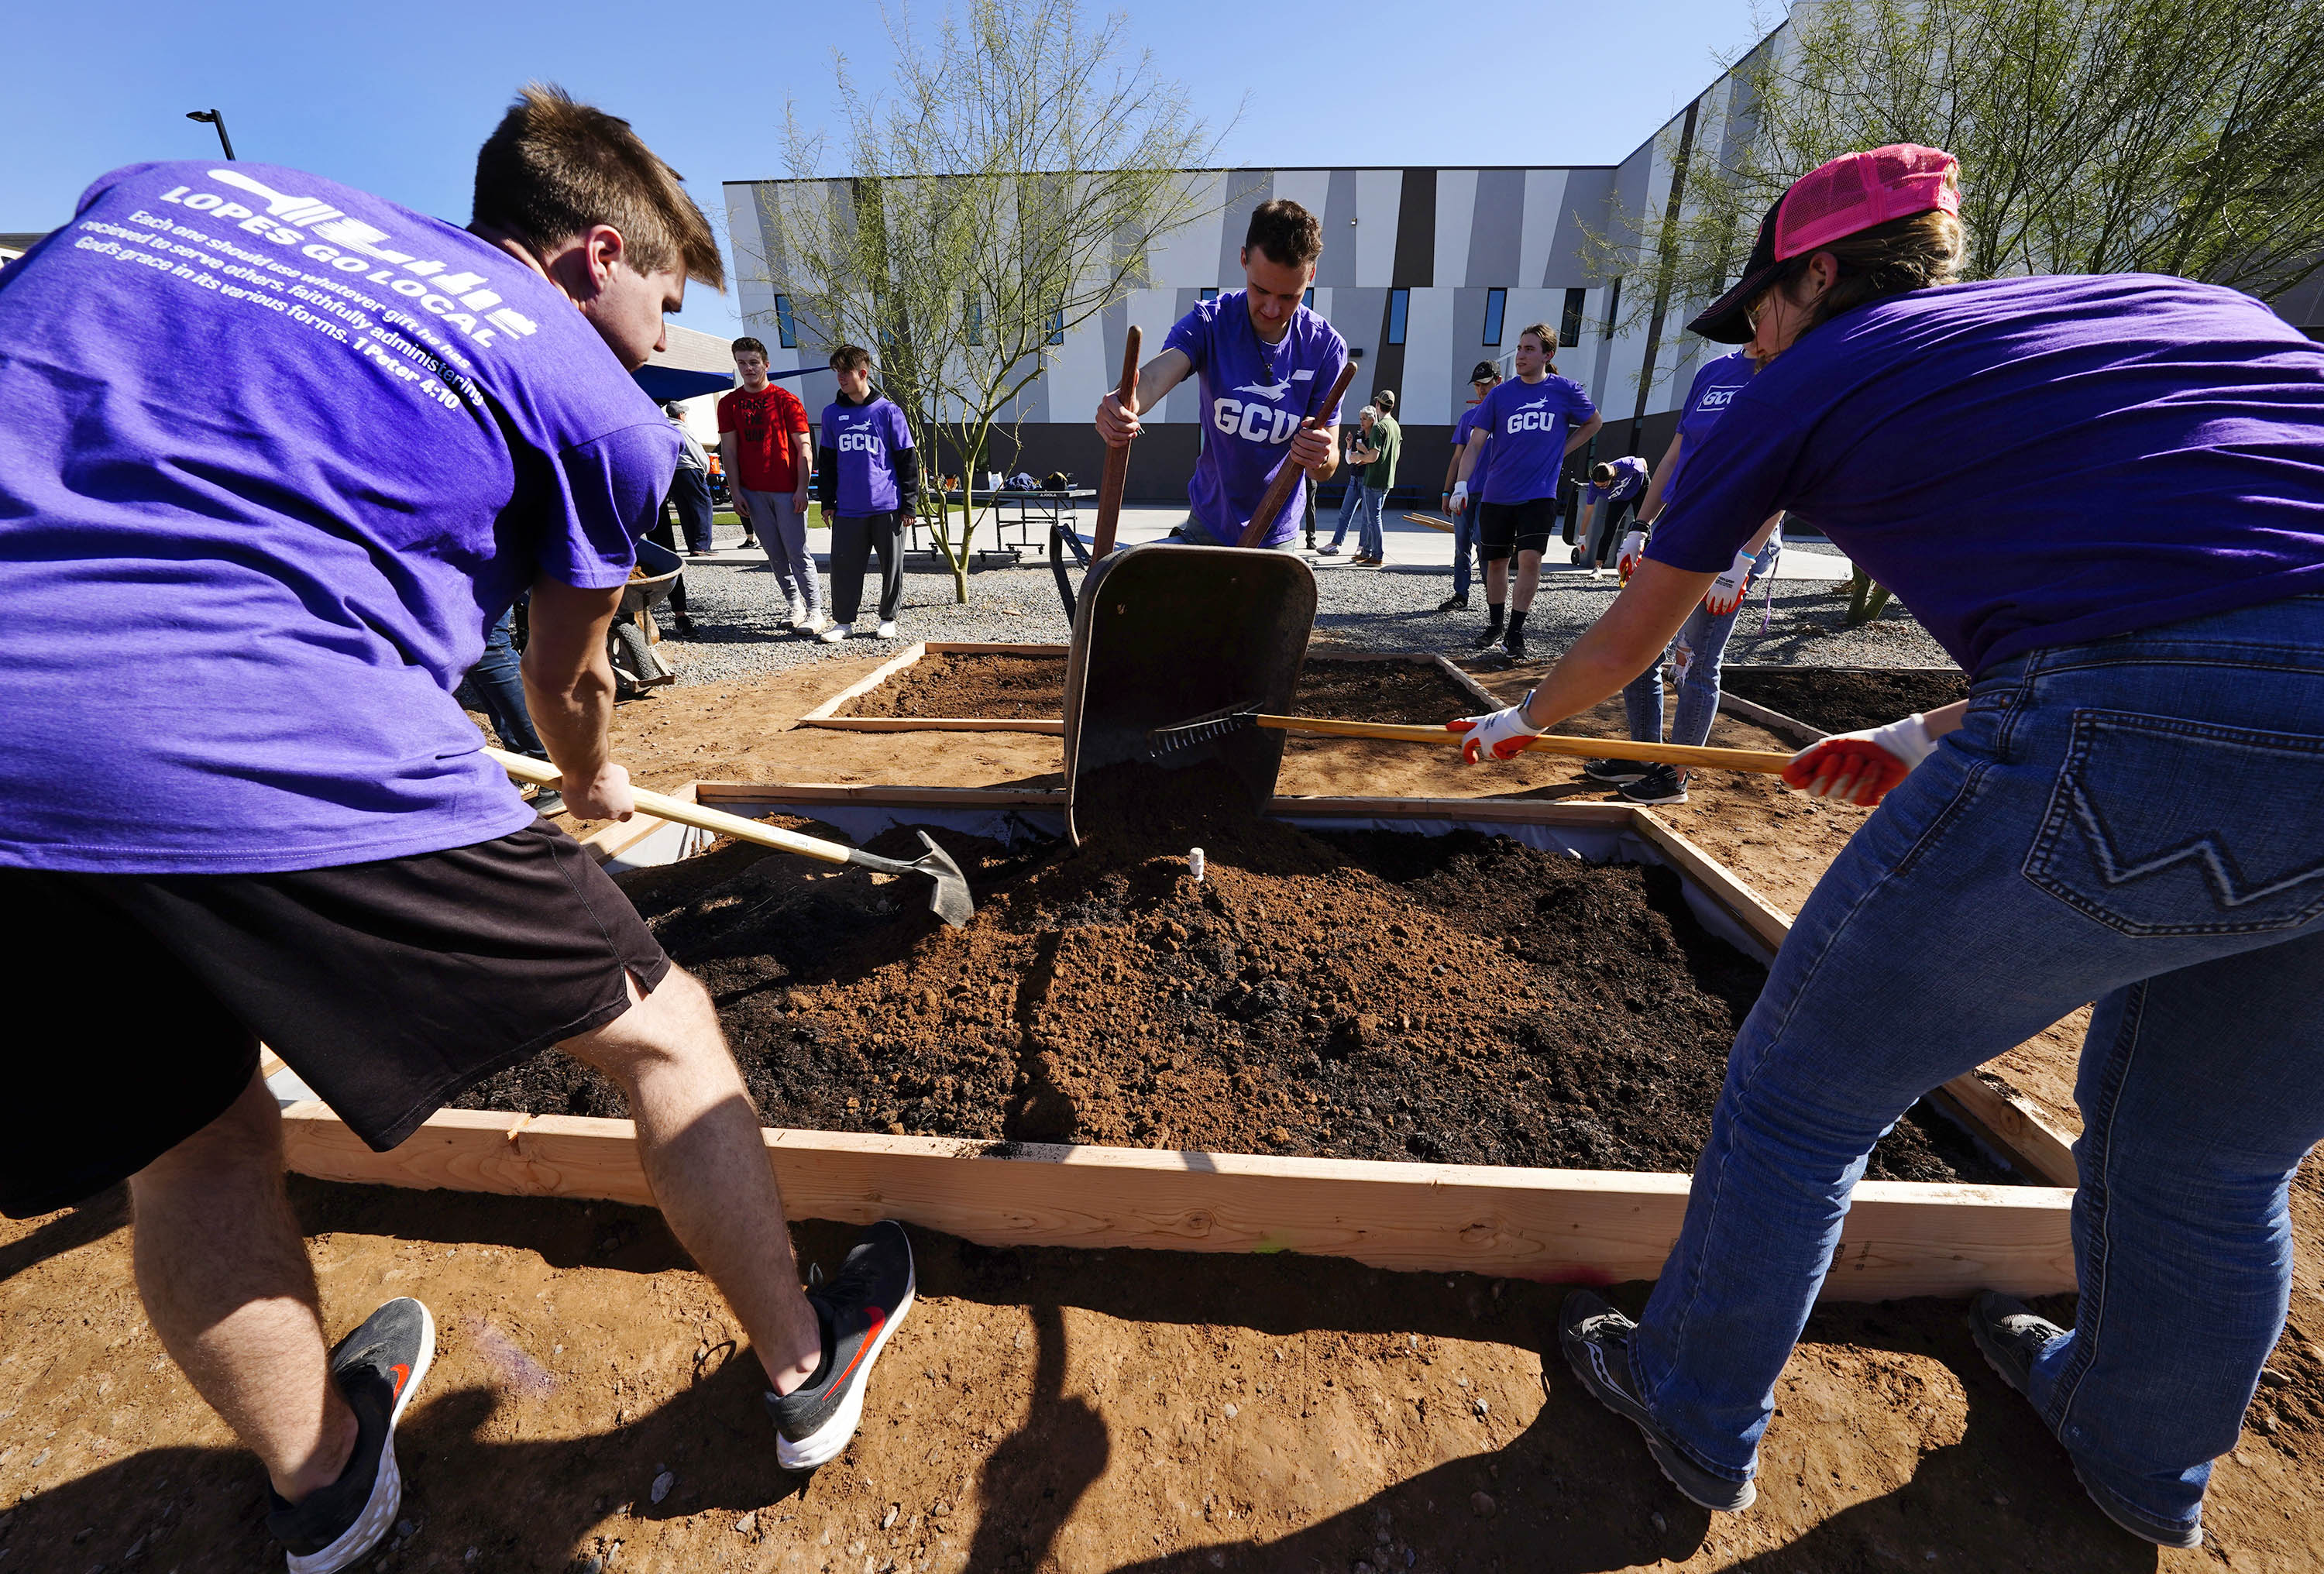 Lopes Go Local volunteers plant seeds of kindness